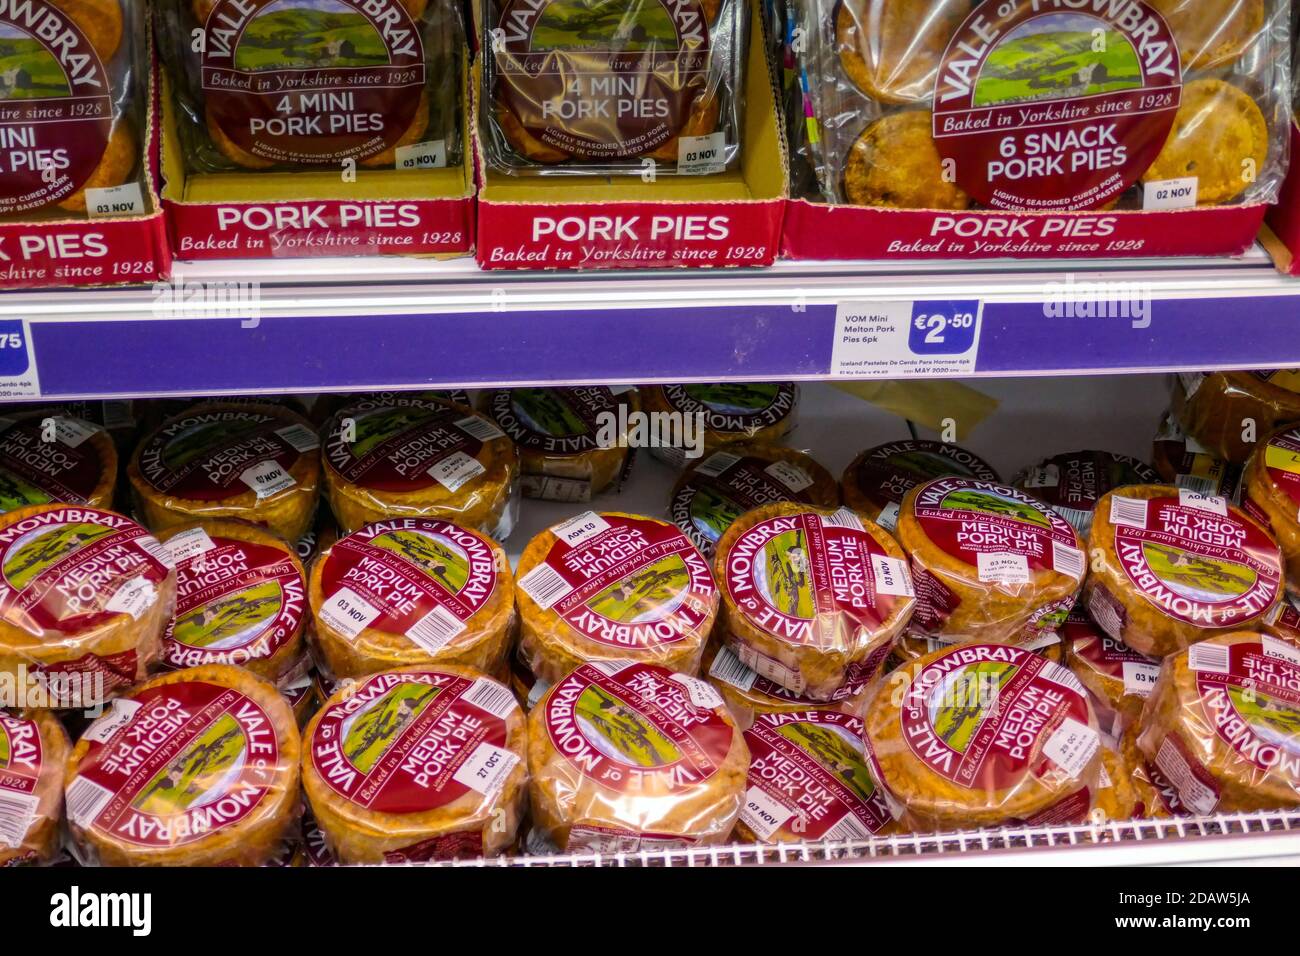 Vale of Mowbray Pork Pies in English supermarket selling English, Waitrose, Iceland goods at Torrevieja, Costa Blanca, Spain Stock Photo